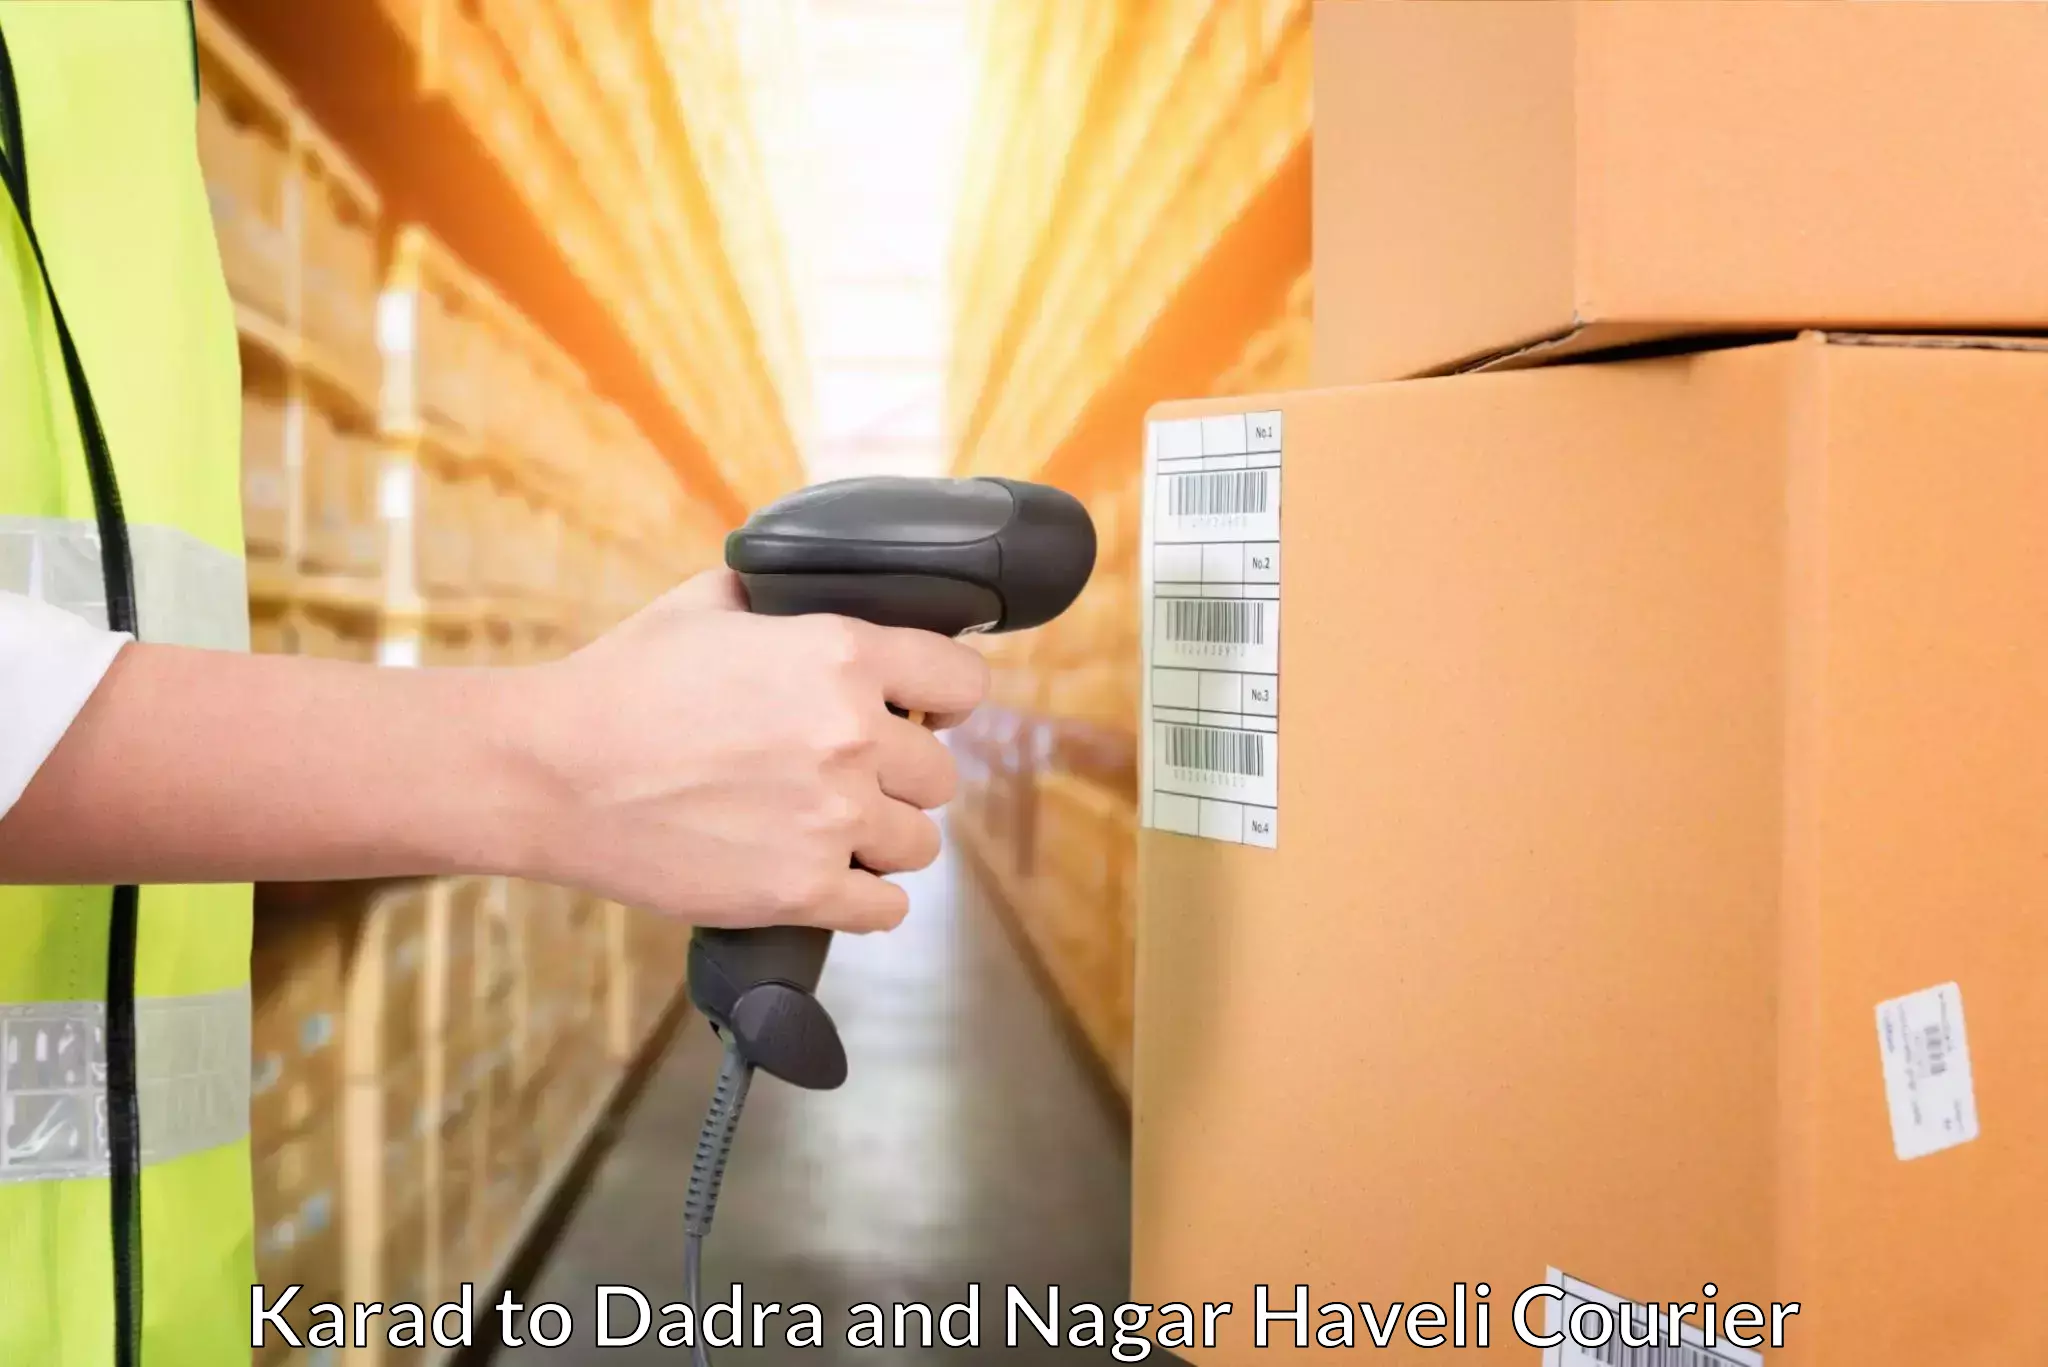 Flexible delivery schedules Karad to Dadra and Nagar Haveli